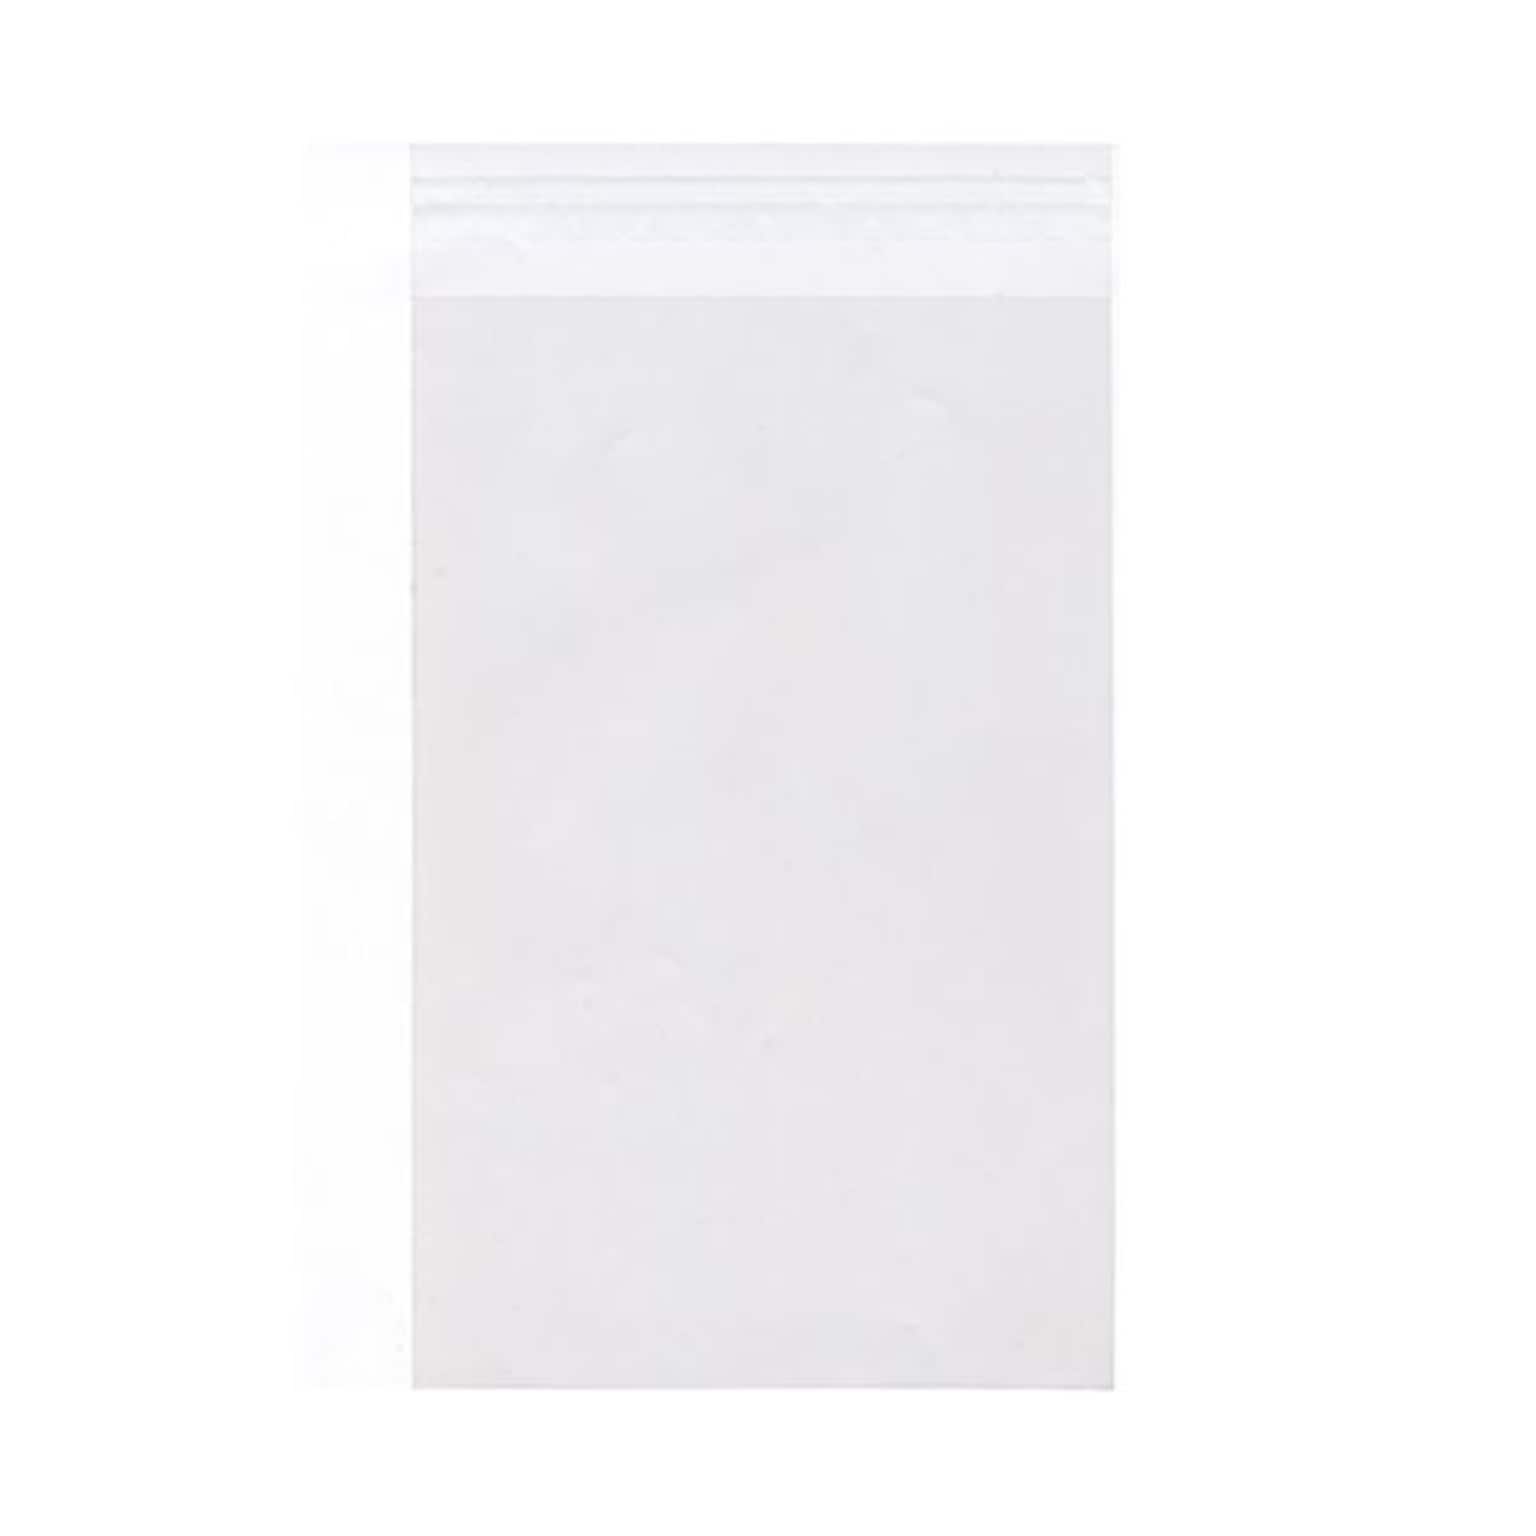 JAM Paper Cello Sleeves with Peel & Seal Closure, 17.4375 x 22.25, Clear, 100/Pack (17.5X22.25CELLO)